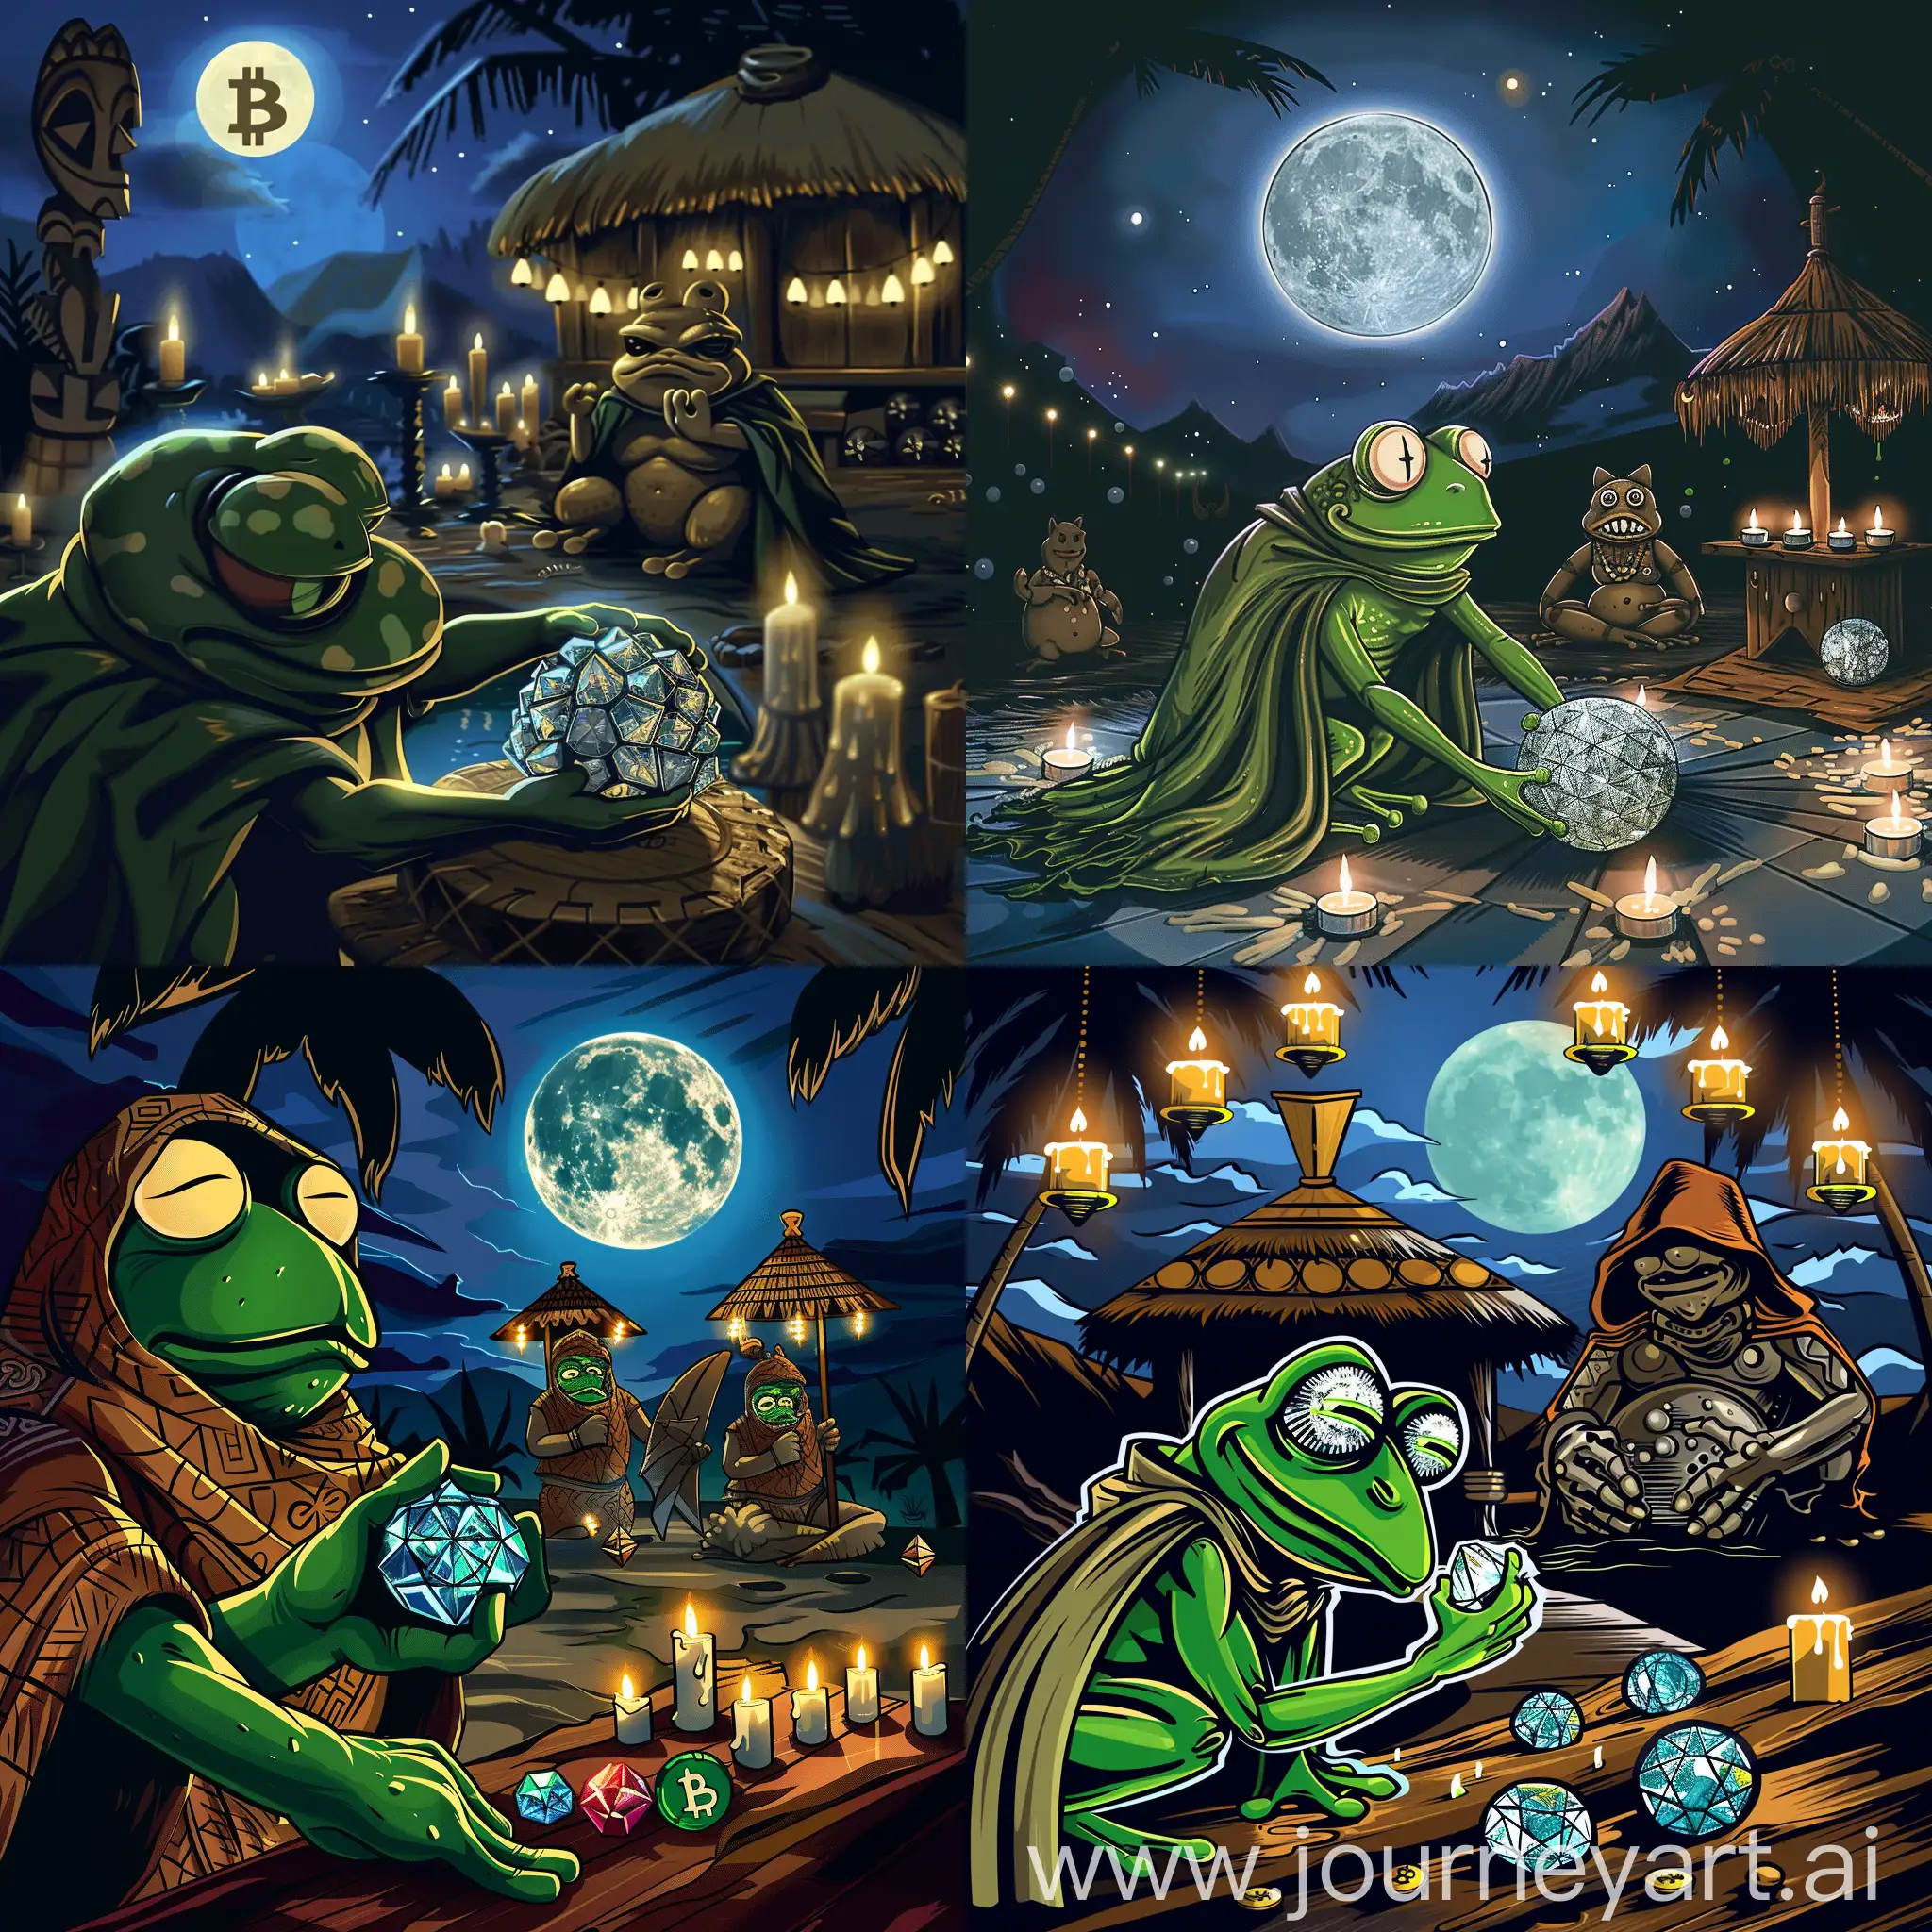 You know pepe crypto coin? It's a green frog logo. I'll make new crypto coin. Help me design. Let’s see how good it is. Create a midjourney of PePe in a cloak rubbing NARPs diamond balls while DOGE is in a cloak in the background watching. Have candles on tikis lit around the scene and it be a full moon